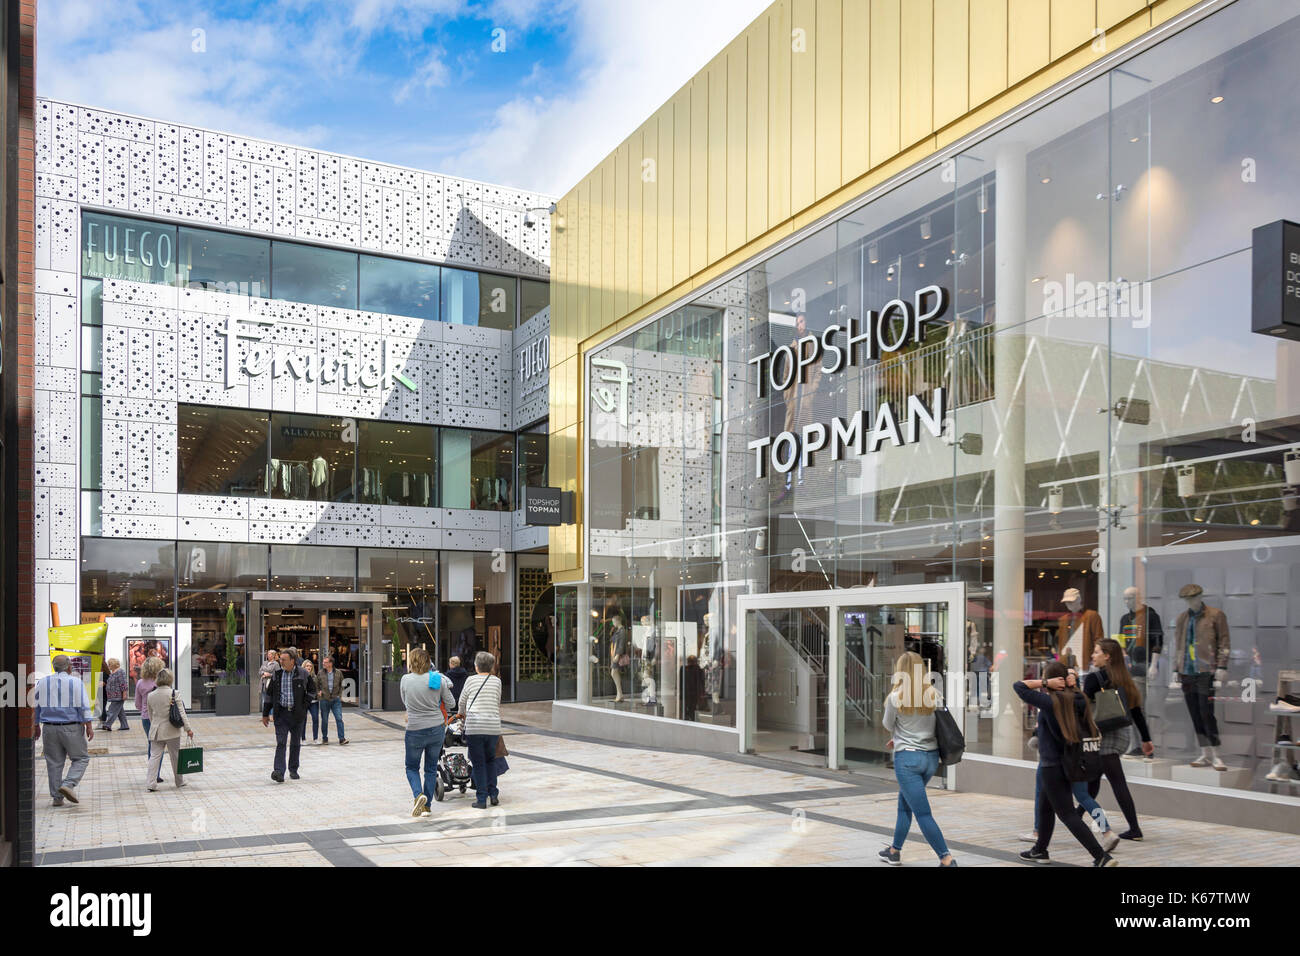 Fenwick and Topshop department stores on The Avenue, The Lexicon, Bracknell, Berkshire, England, United Kingdom Stock Photo